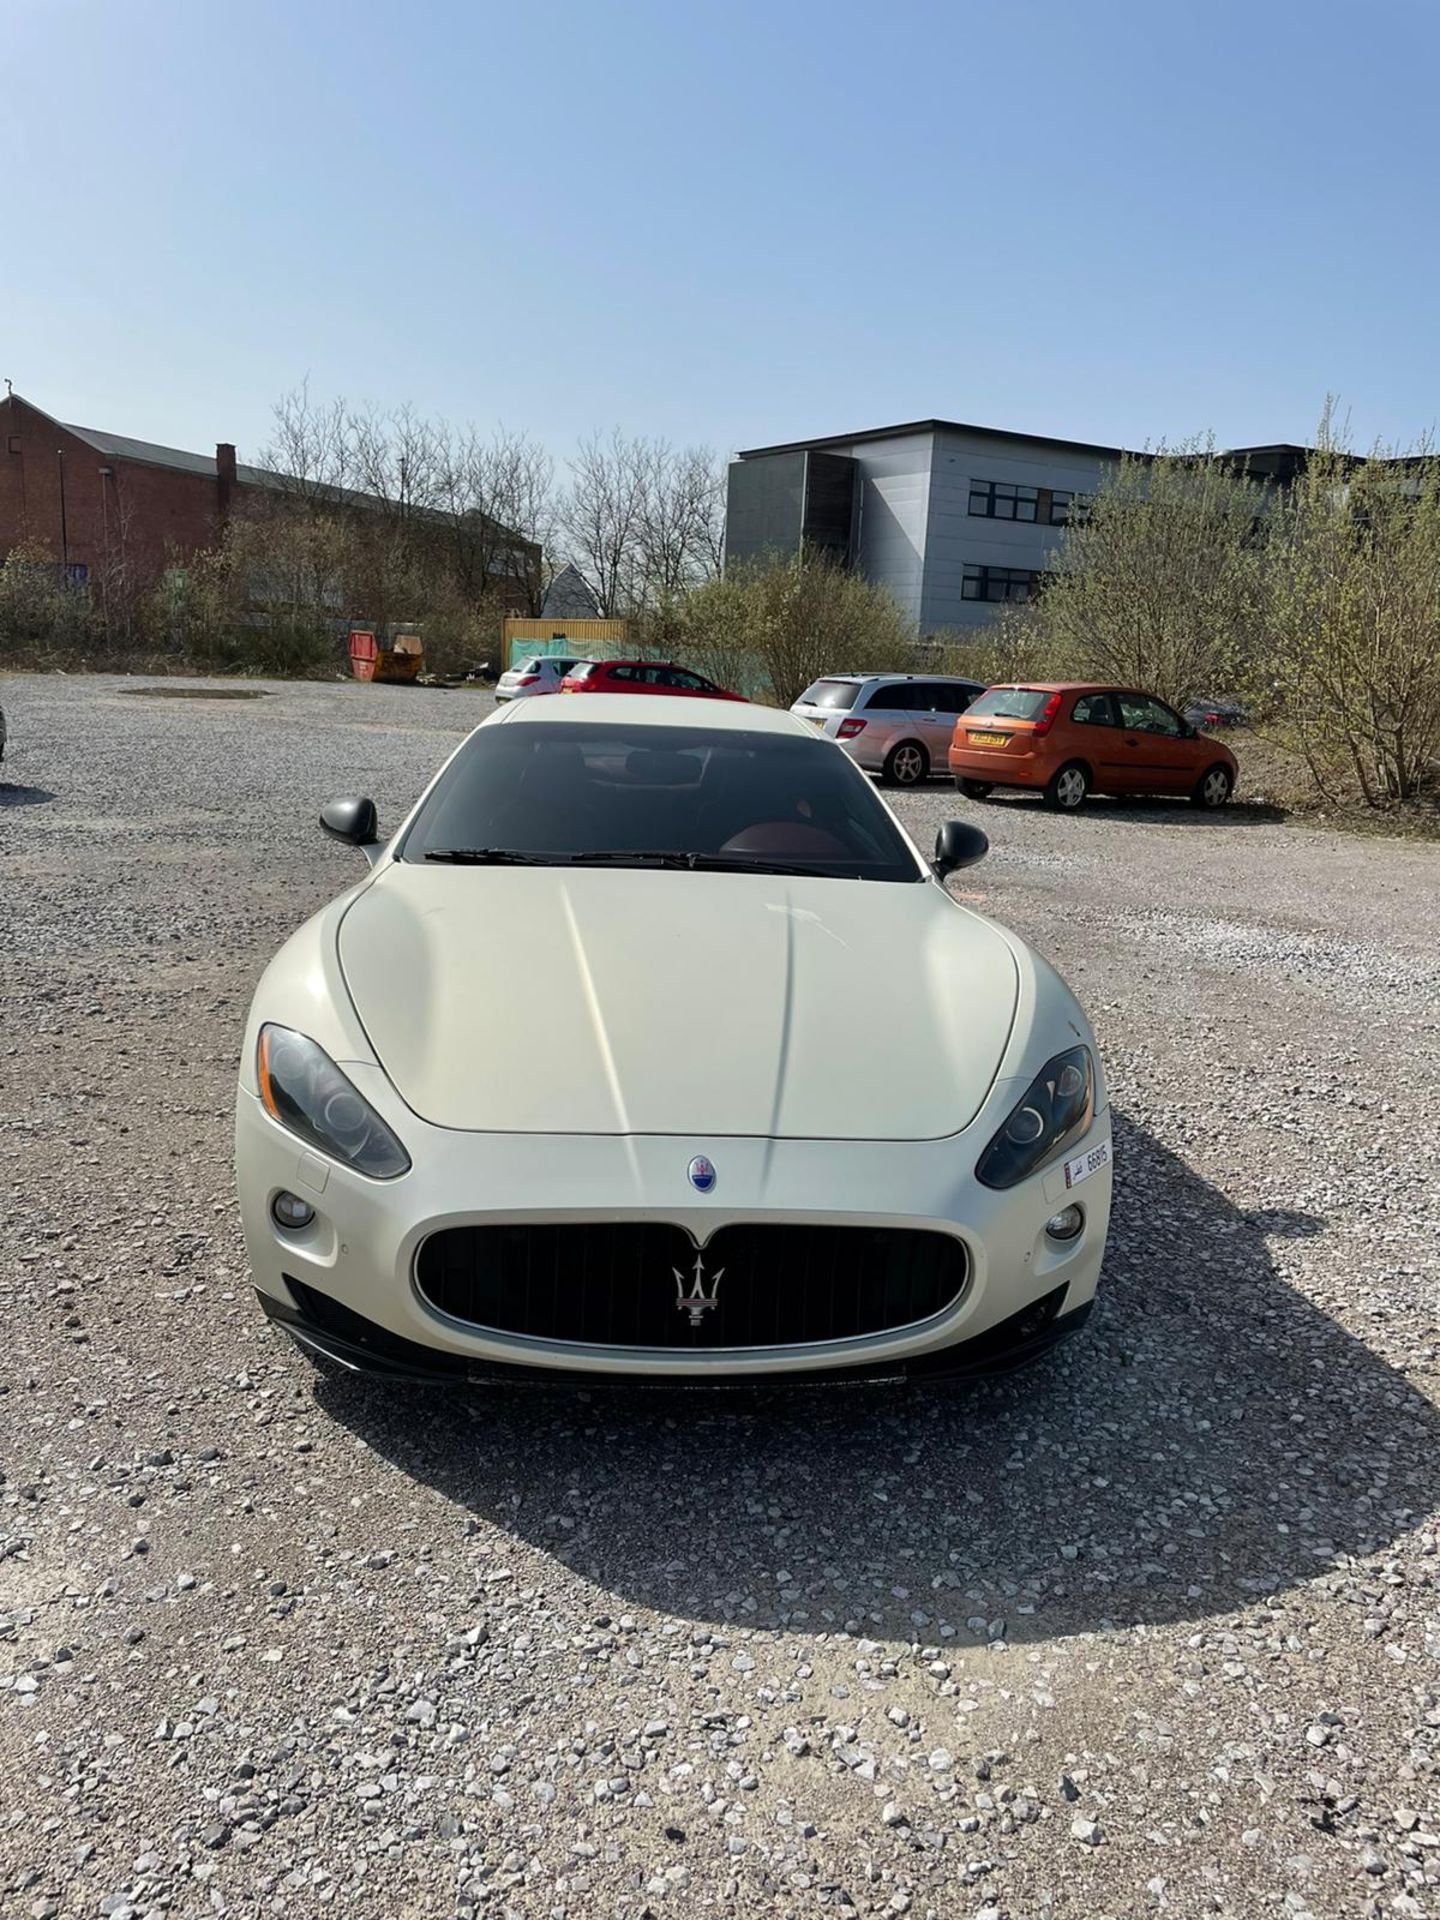 2013 MASERATI 4.7 V8 MC SHIFT, HUGE CARBON SPEC, VERY GOOD CONDITION RECENTLY CLEANED UP *PLUS VAT* - Image 2 of 14